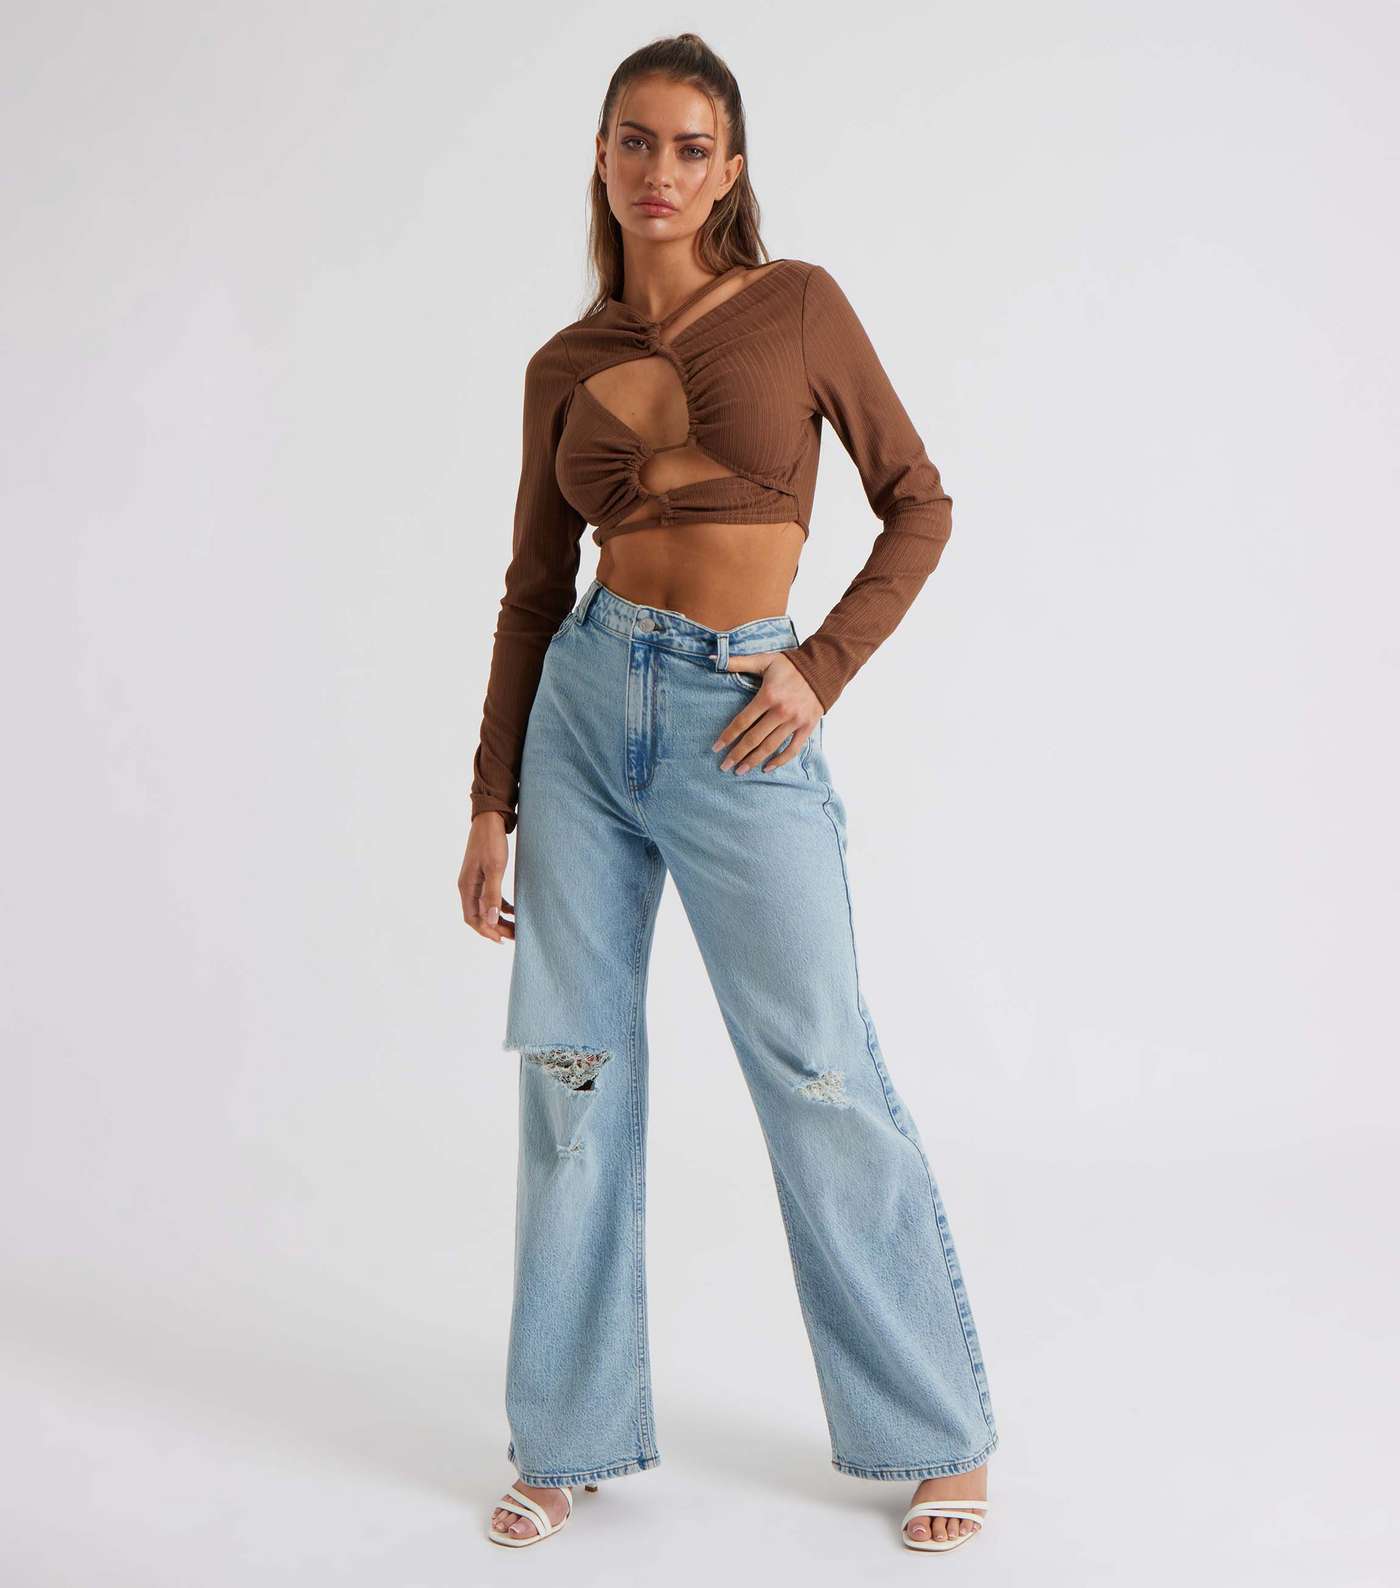 Urban Bliss Brown Cut Out Crop Top Image 3